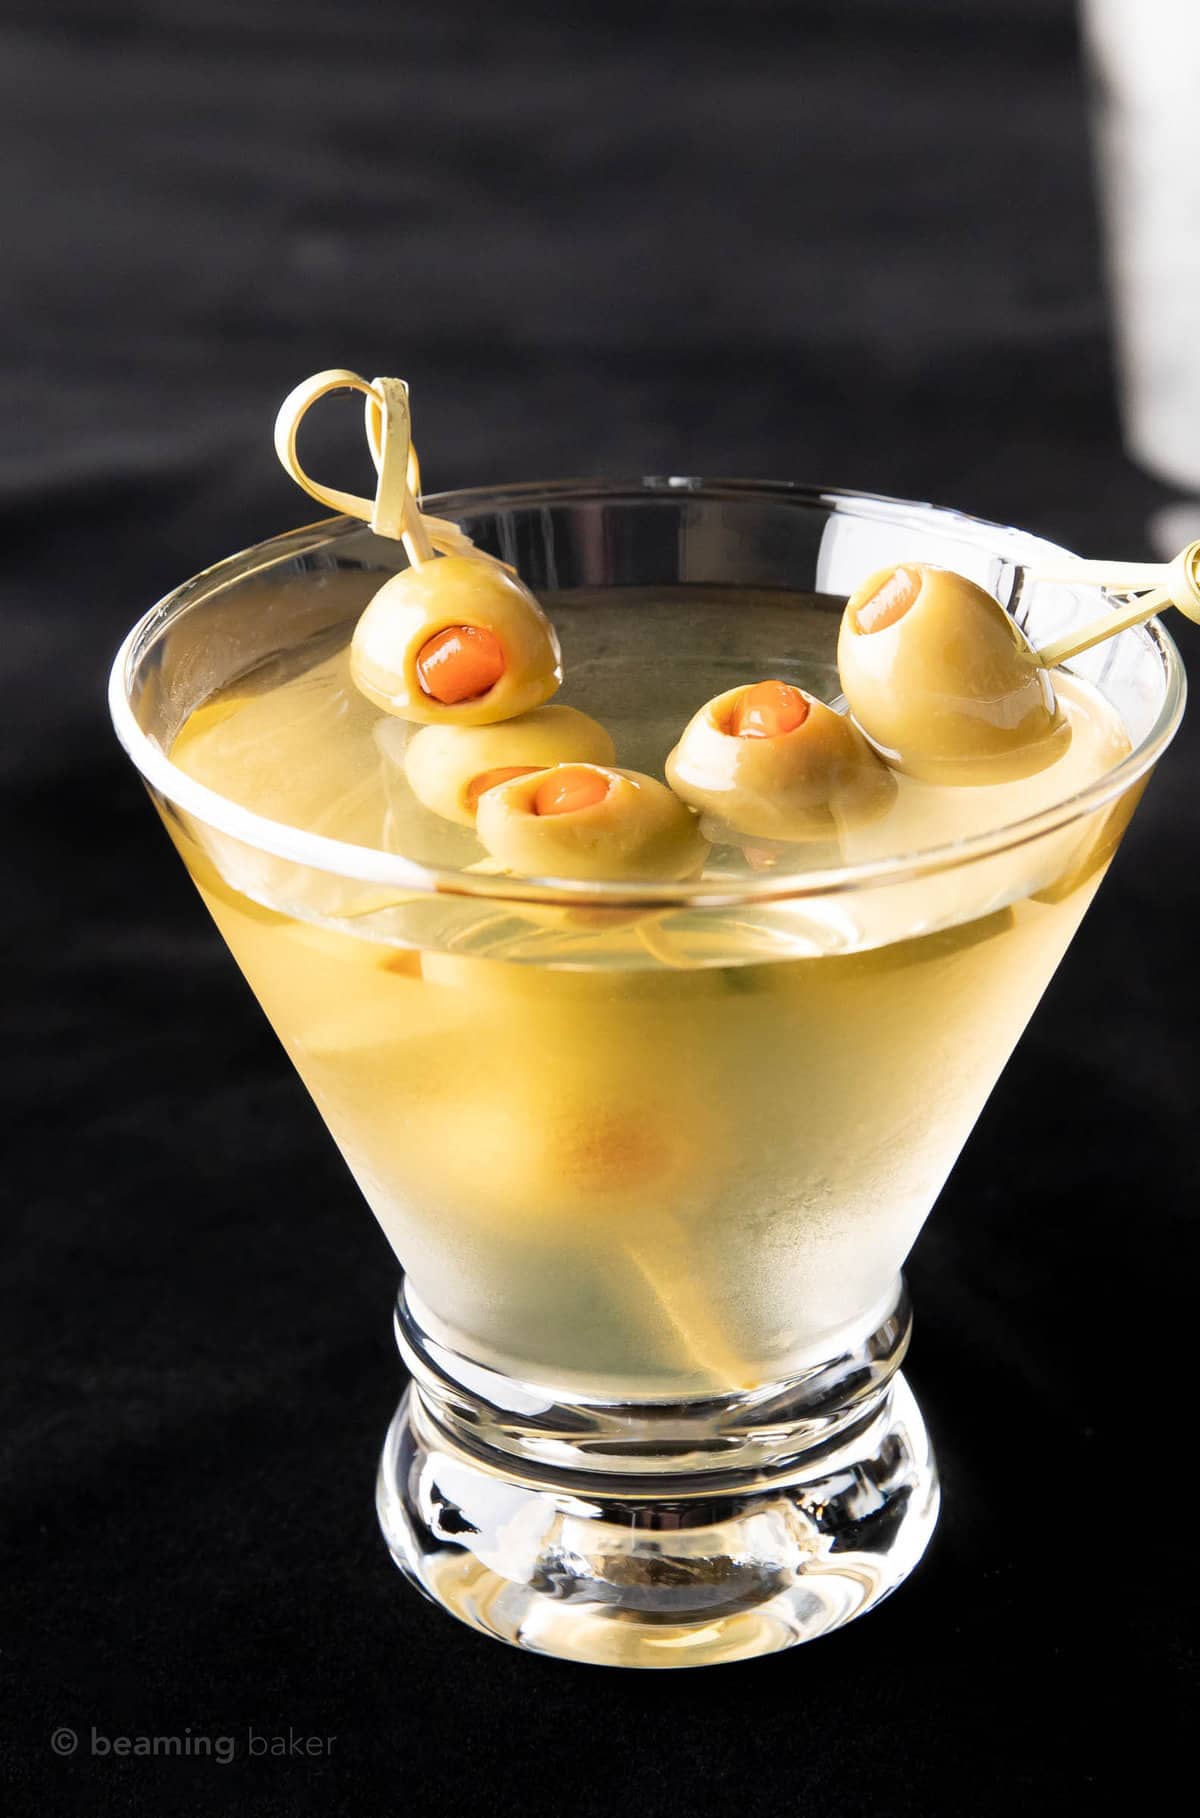 Two olive skewers in an extra dirty martini